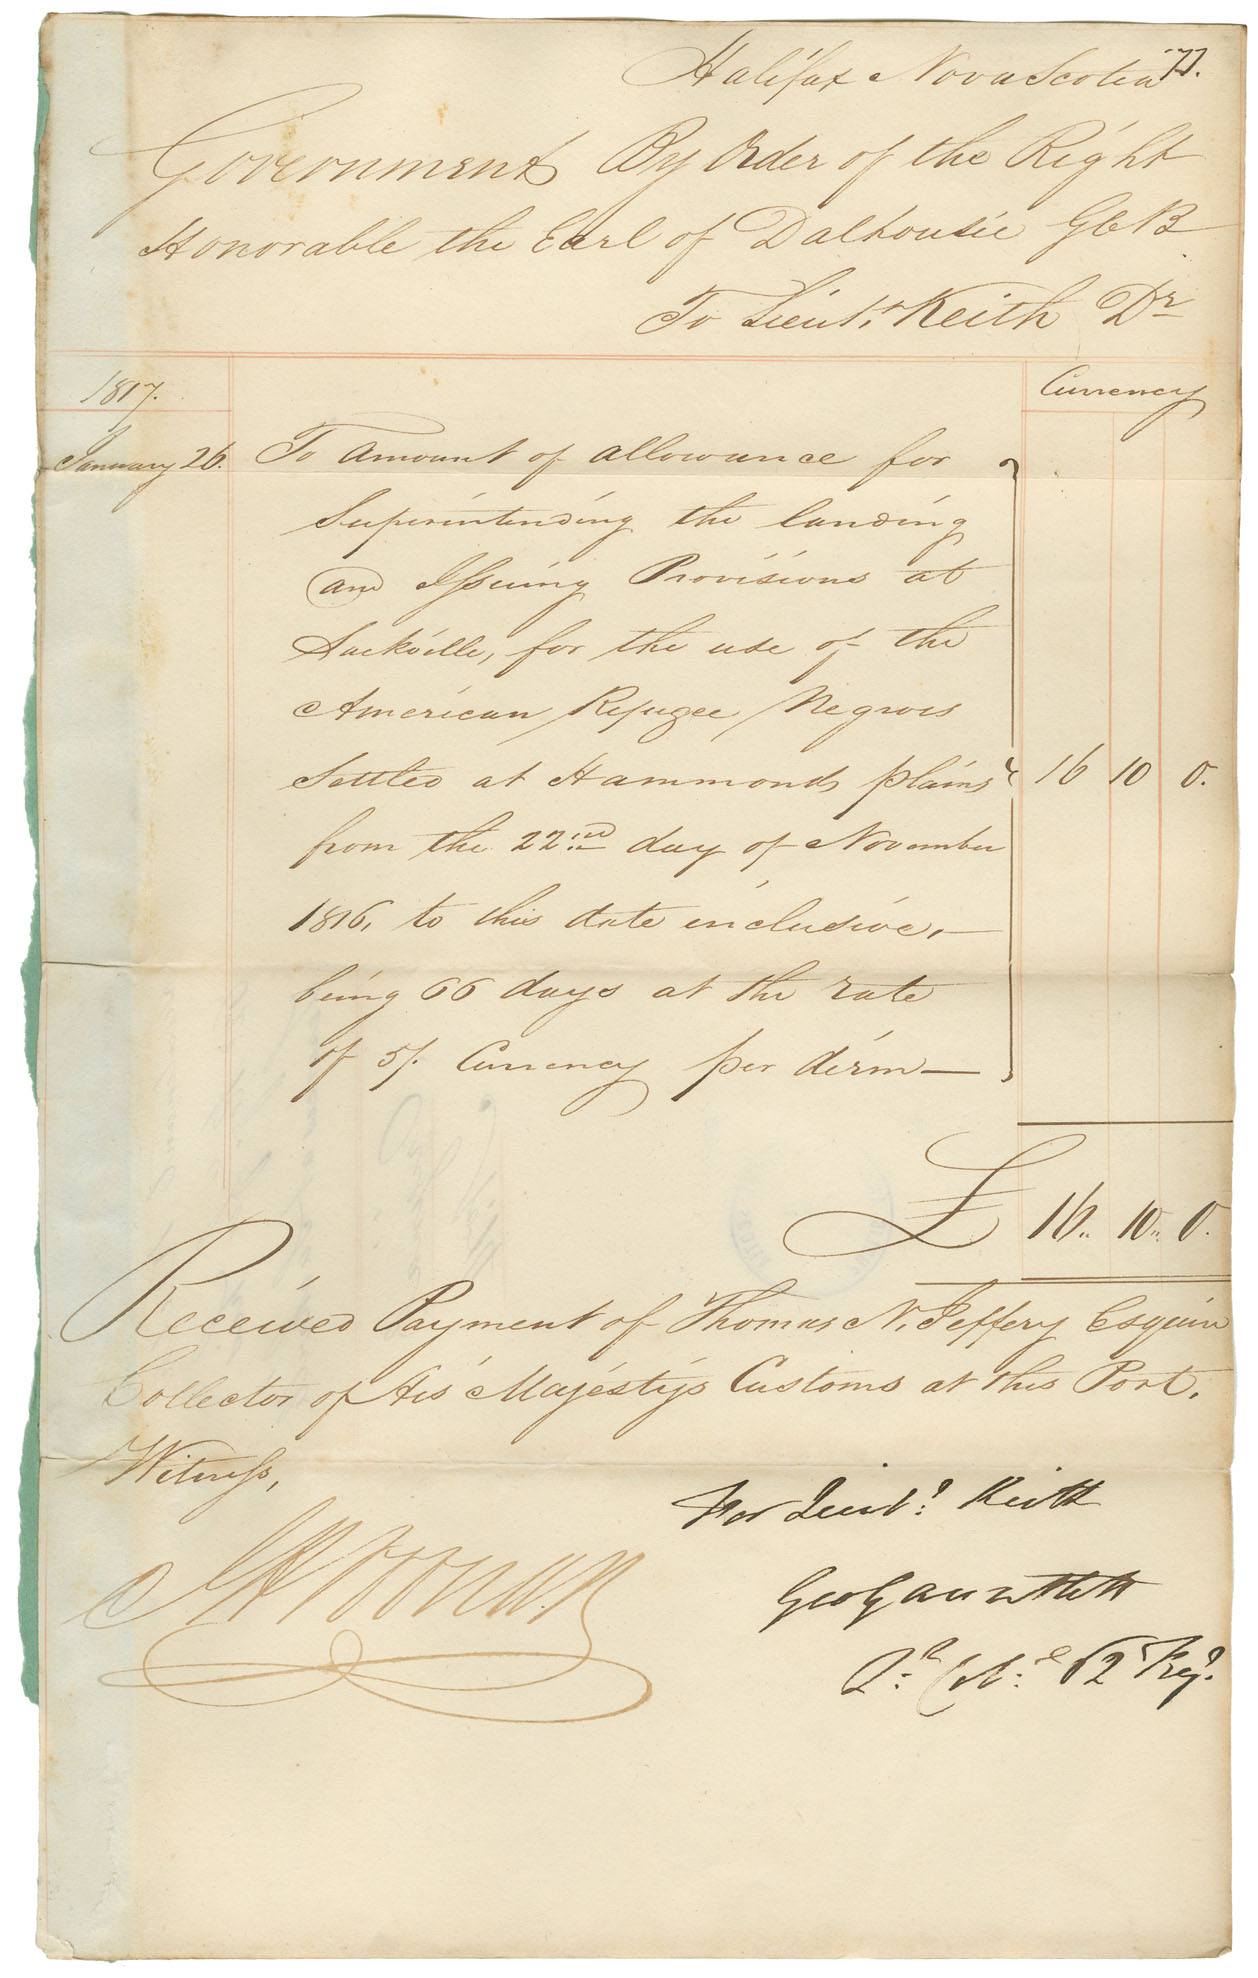 african-heritage : Accounts against Government for Black Refugees up to 26 December 1816, with the following suppliers: Seth Coleman, Theophilus Chamberlain, J